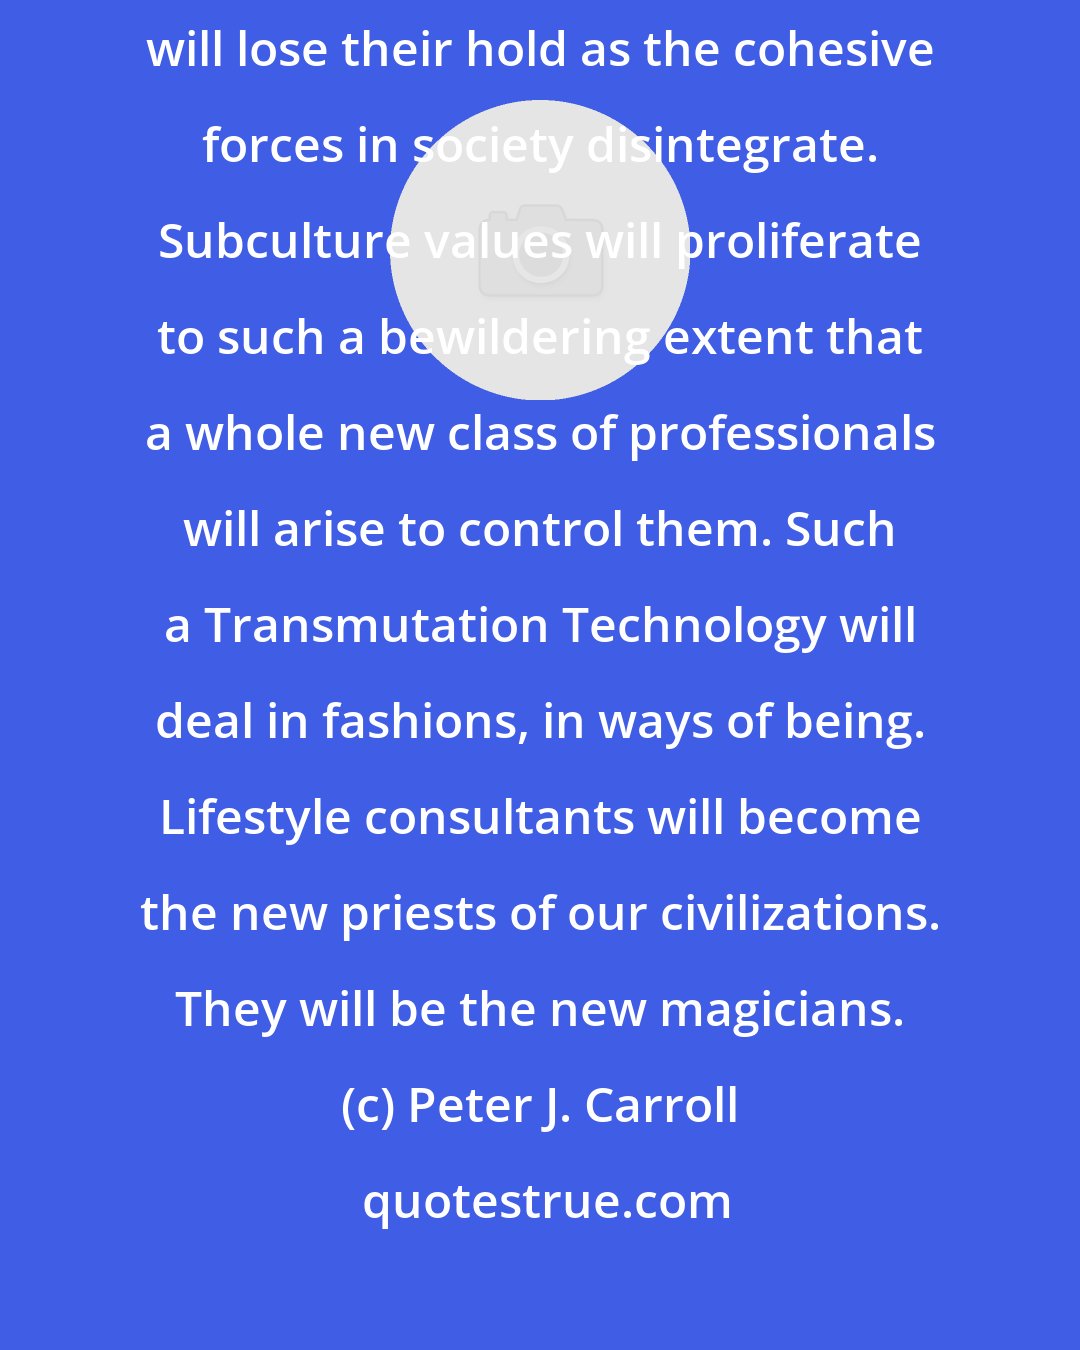 Peter J. Carroll: Ideas about a person's place in society, his role, lifestyle, and ego qualities will lose their hold as the cohesive forces in society disintegrate. Subculture values will proliferate to such a bewildering extent that a whole new class of professionals will arise to control them. Such a Transmutation Technology will deal in fashions, in ways of being. Lifestyle consultants will become the new priests of our civilizations. They will be the new magicians.